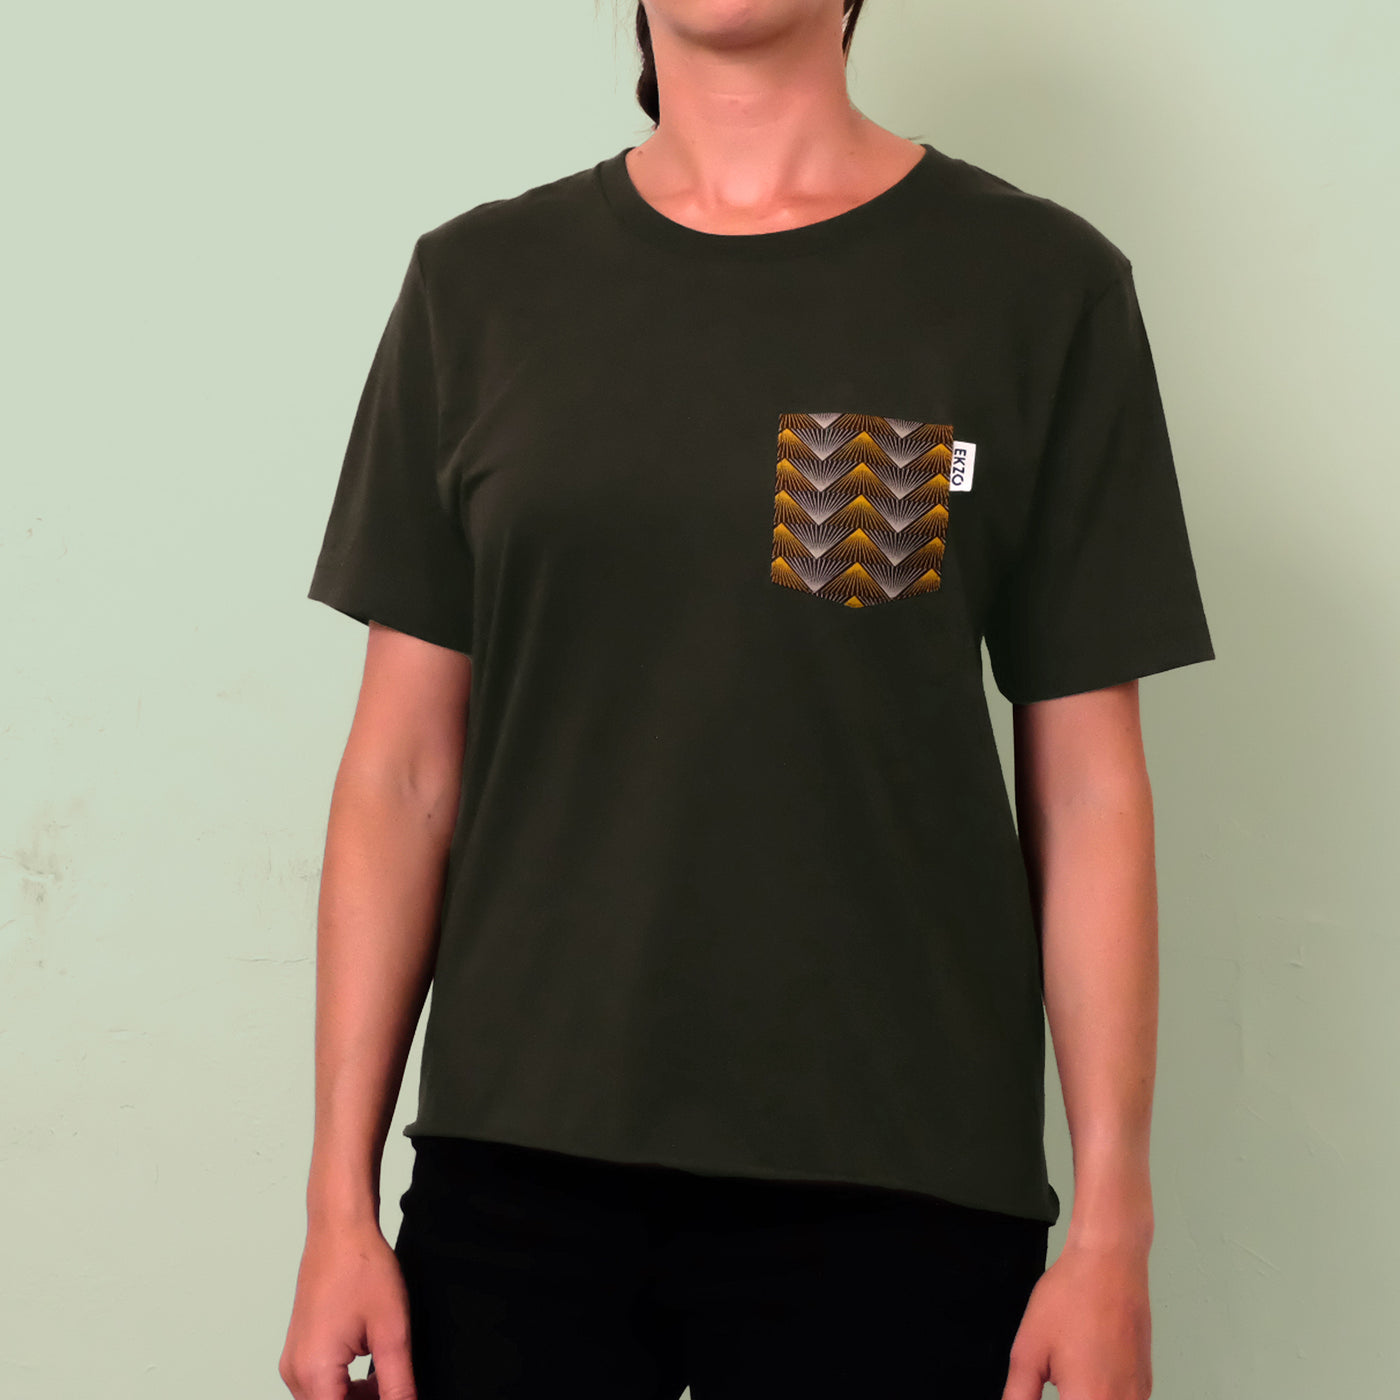 Woman wearing dark green t-shirt with gold and gray chest pocket